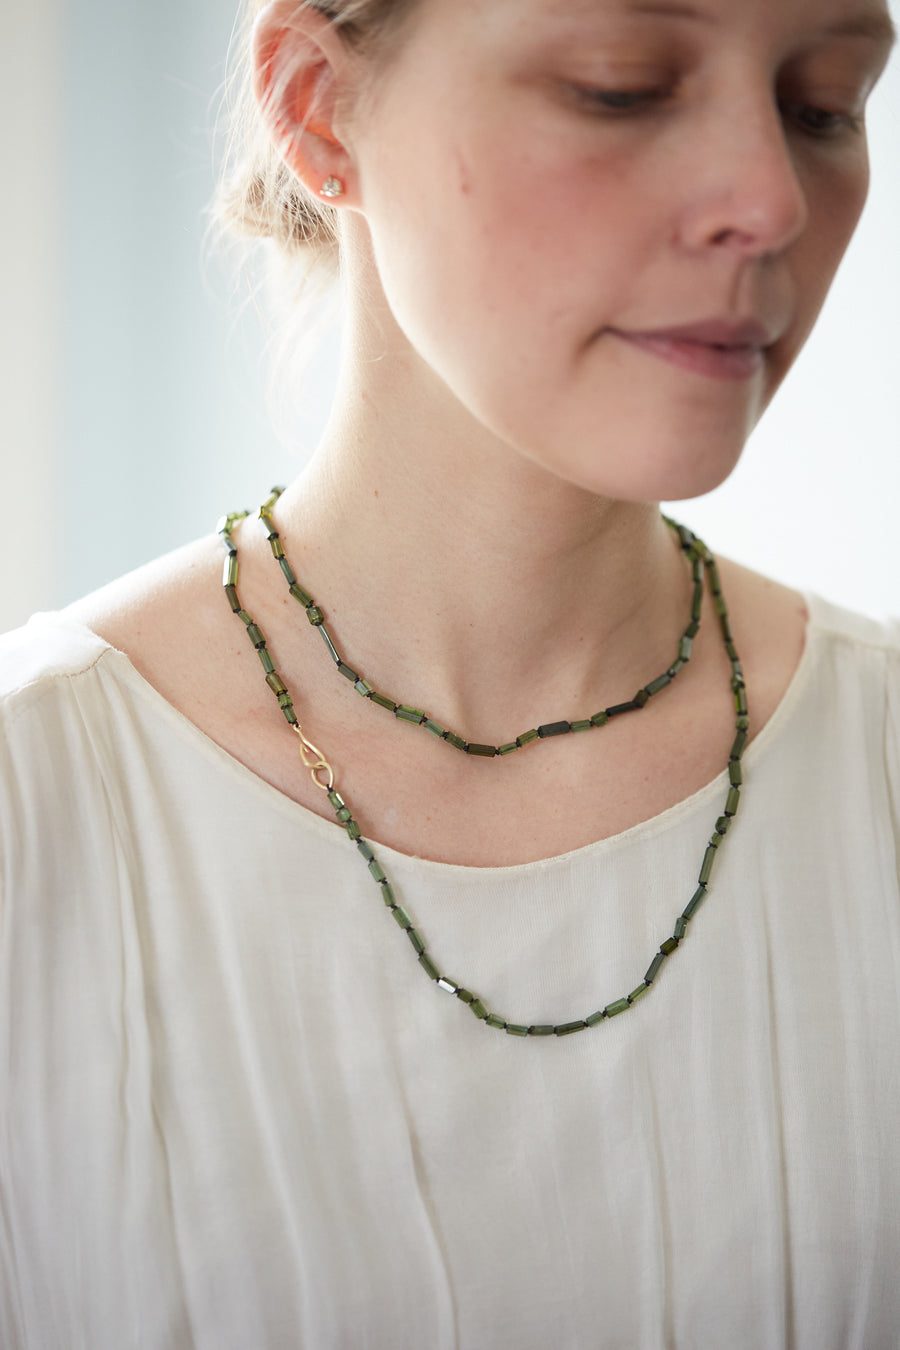 Green Tourmaline beaded necklace by Hannah Blount